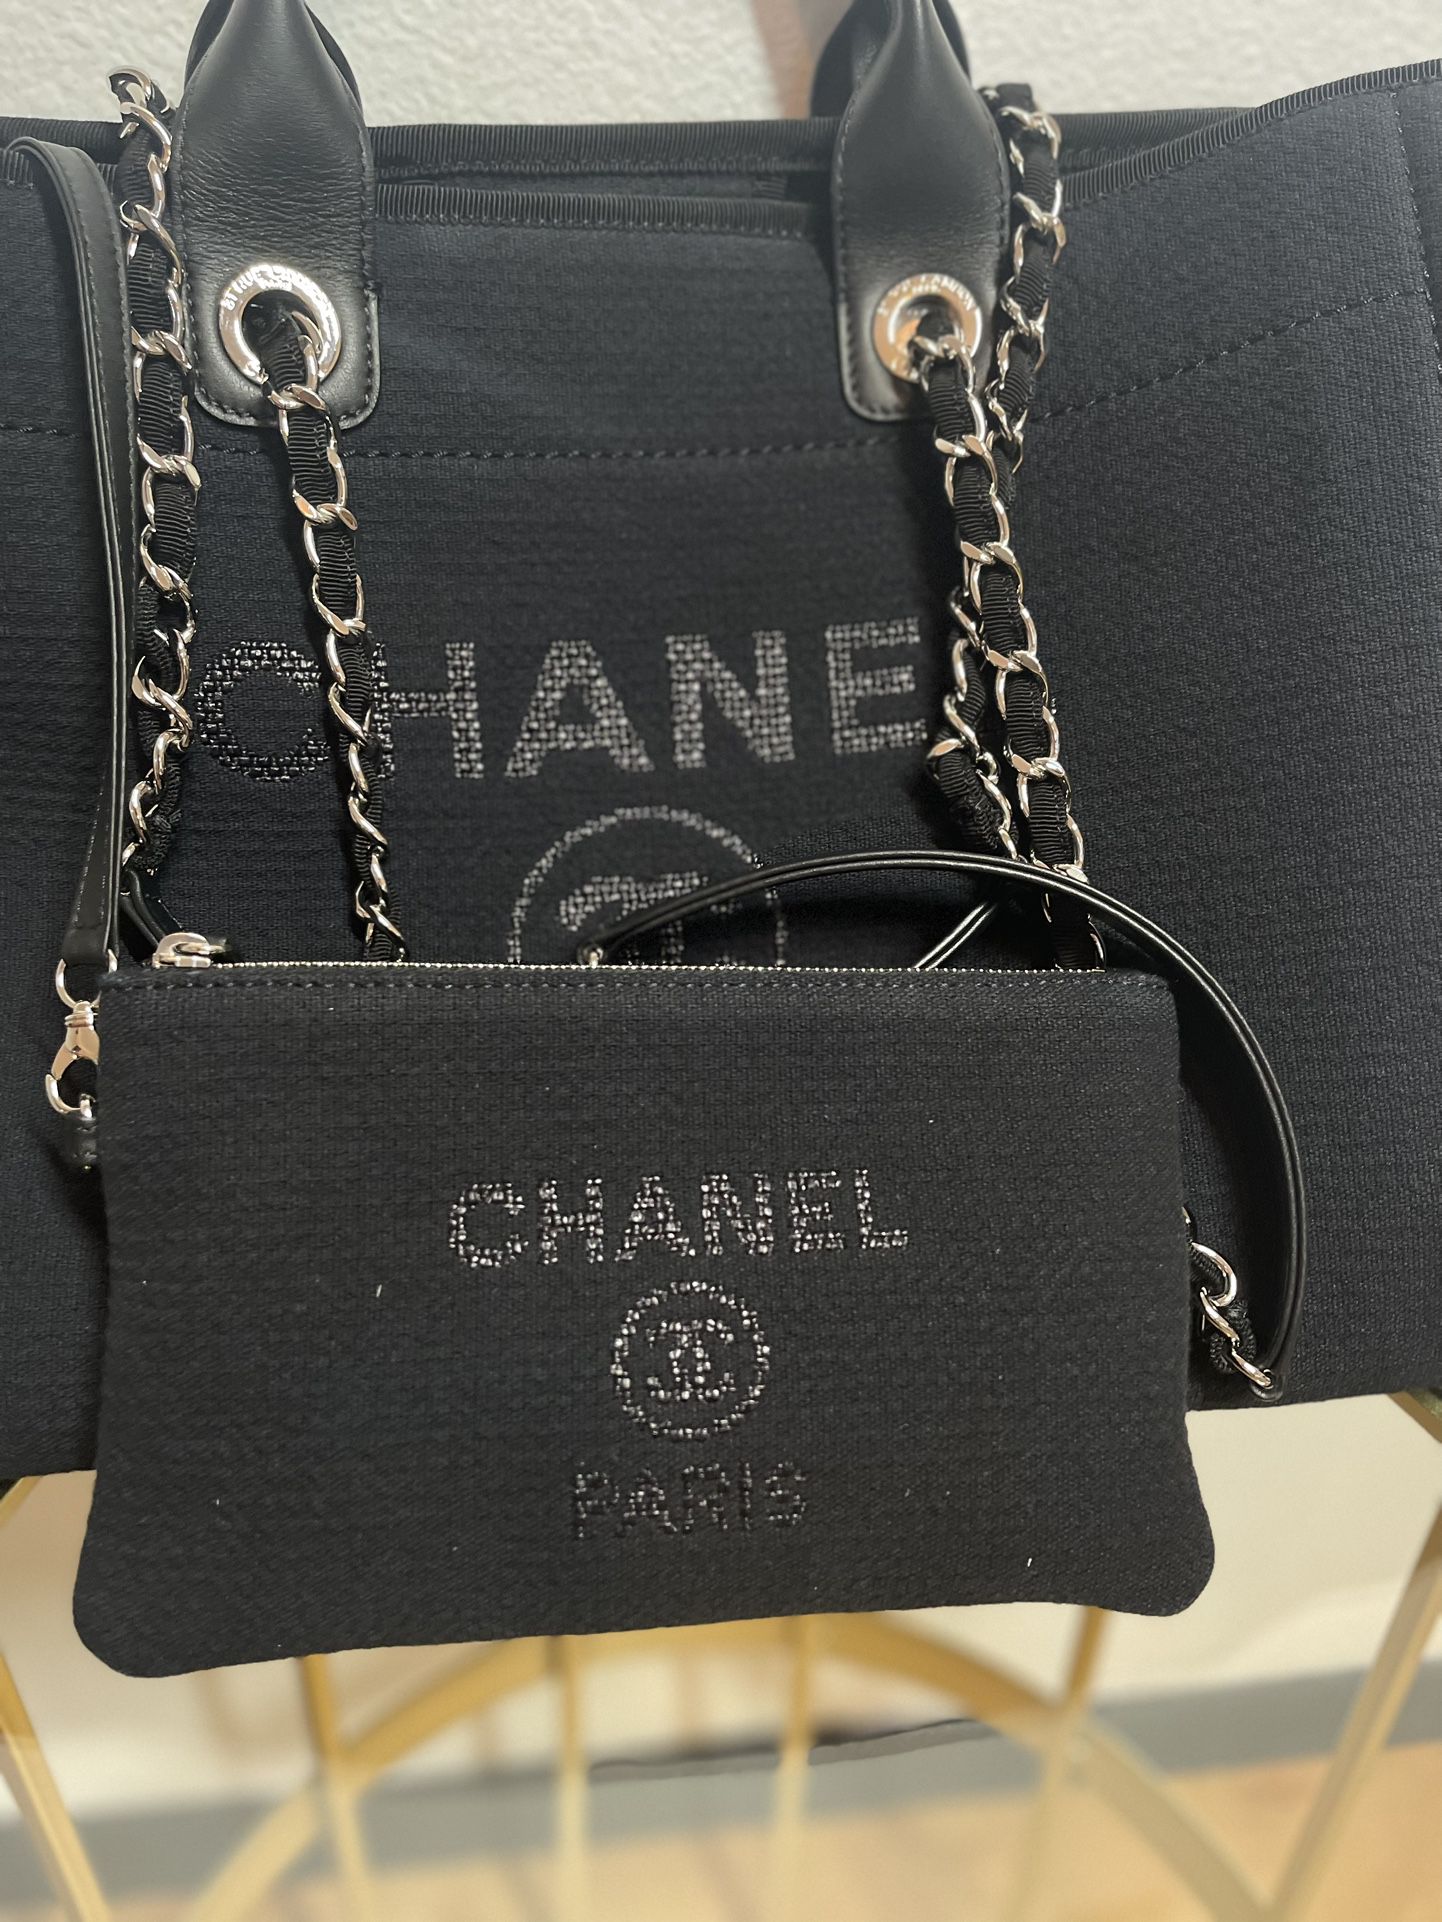 Chanel Deauville Tote for Sale in Beaverton, OR - OfferUp